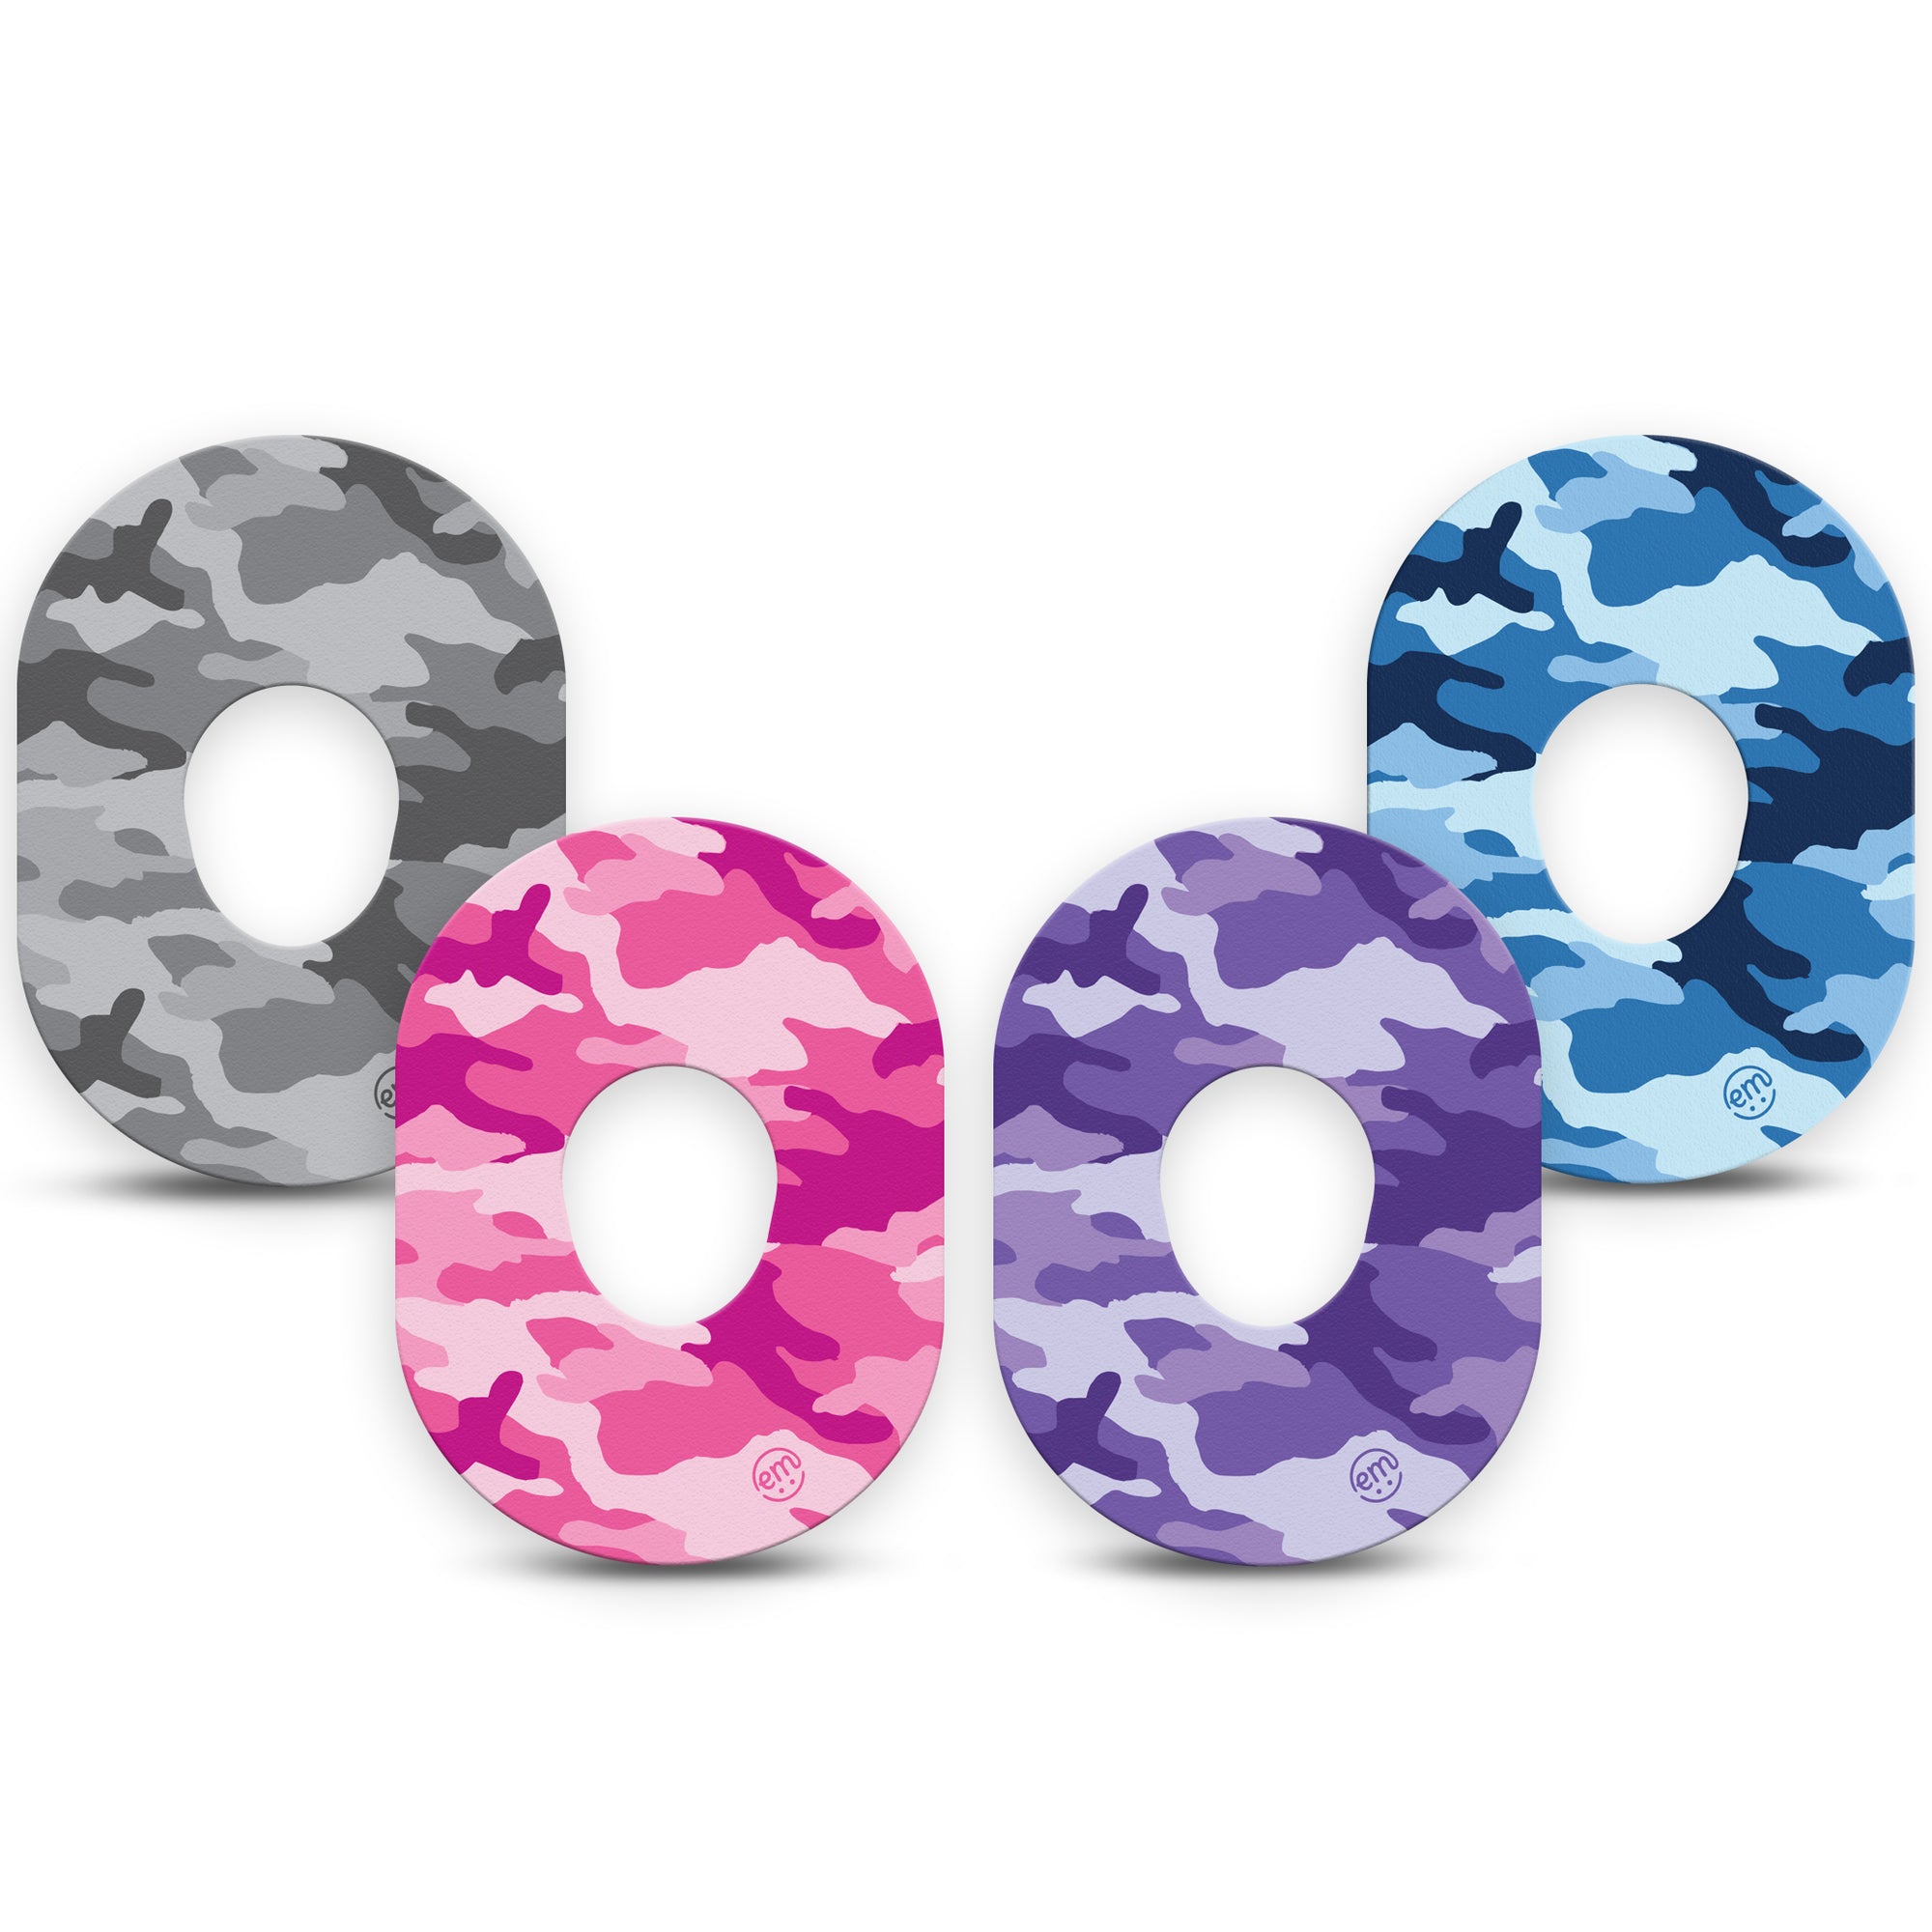 Cool Camo Variety Pack Dexcom G7 Tape, 4-Pack, Colorful Camouflage Inspired, CGM Patch Design